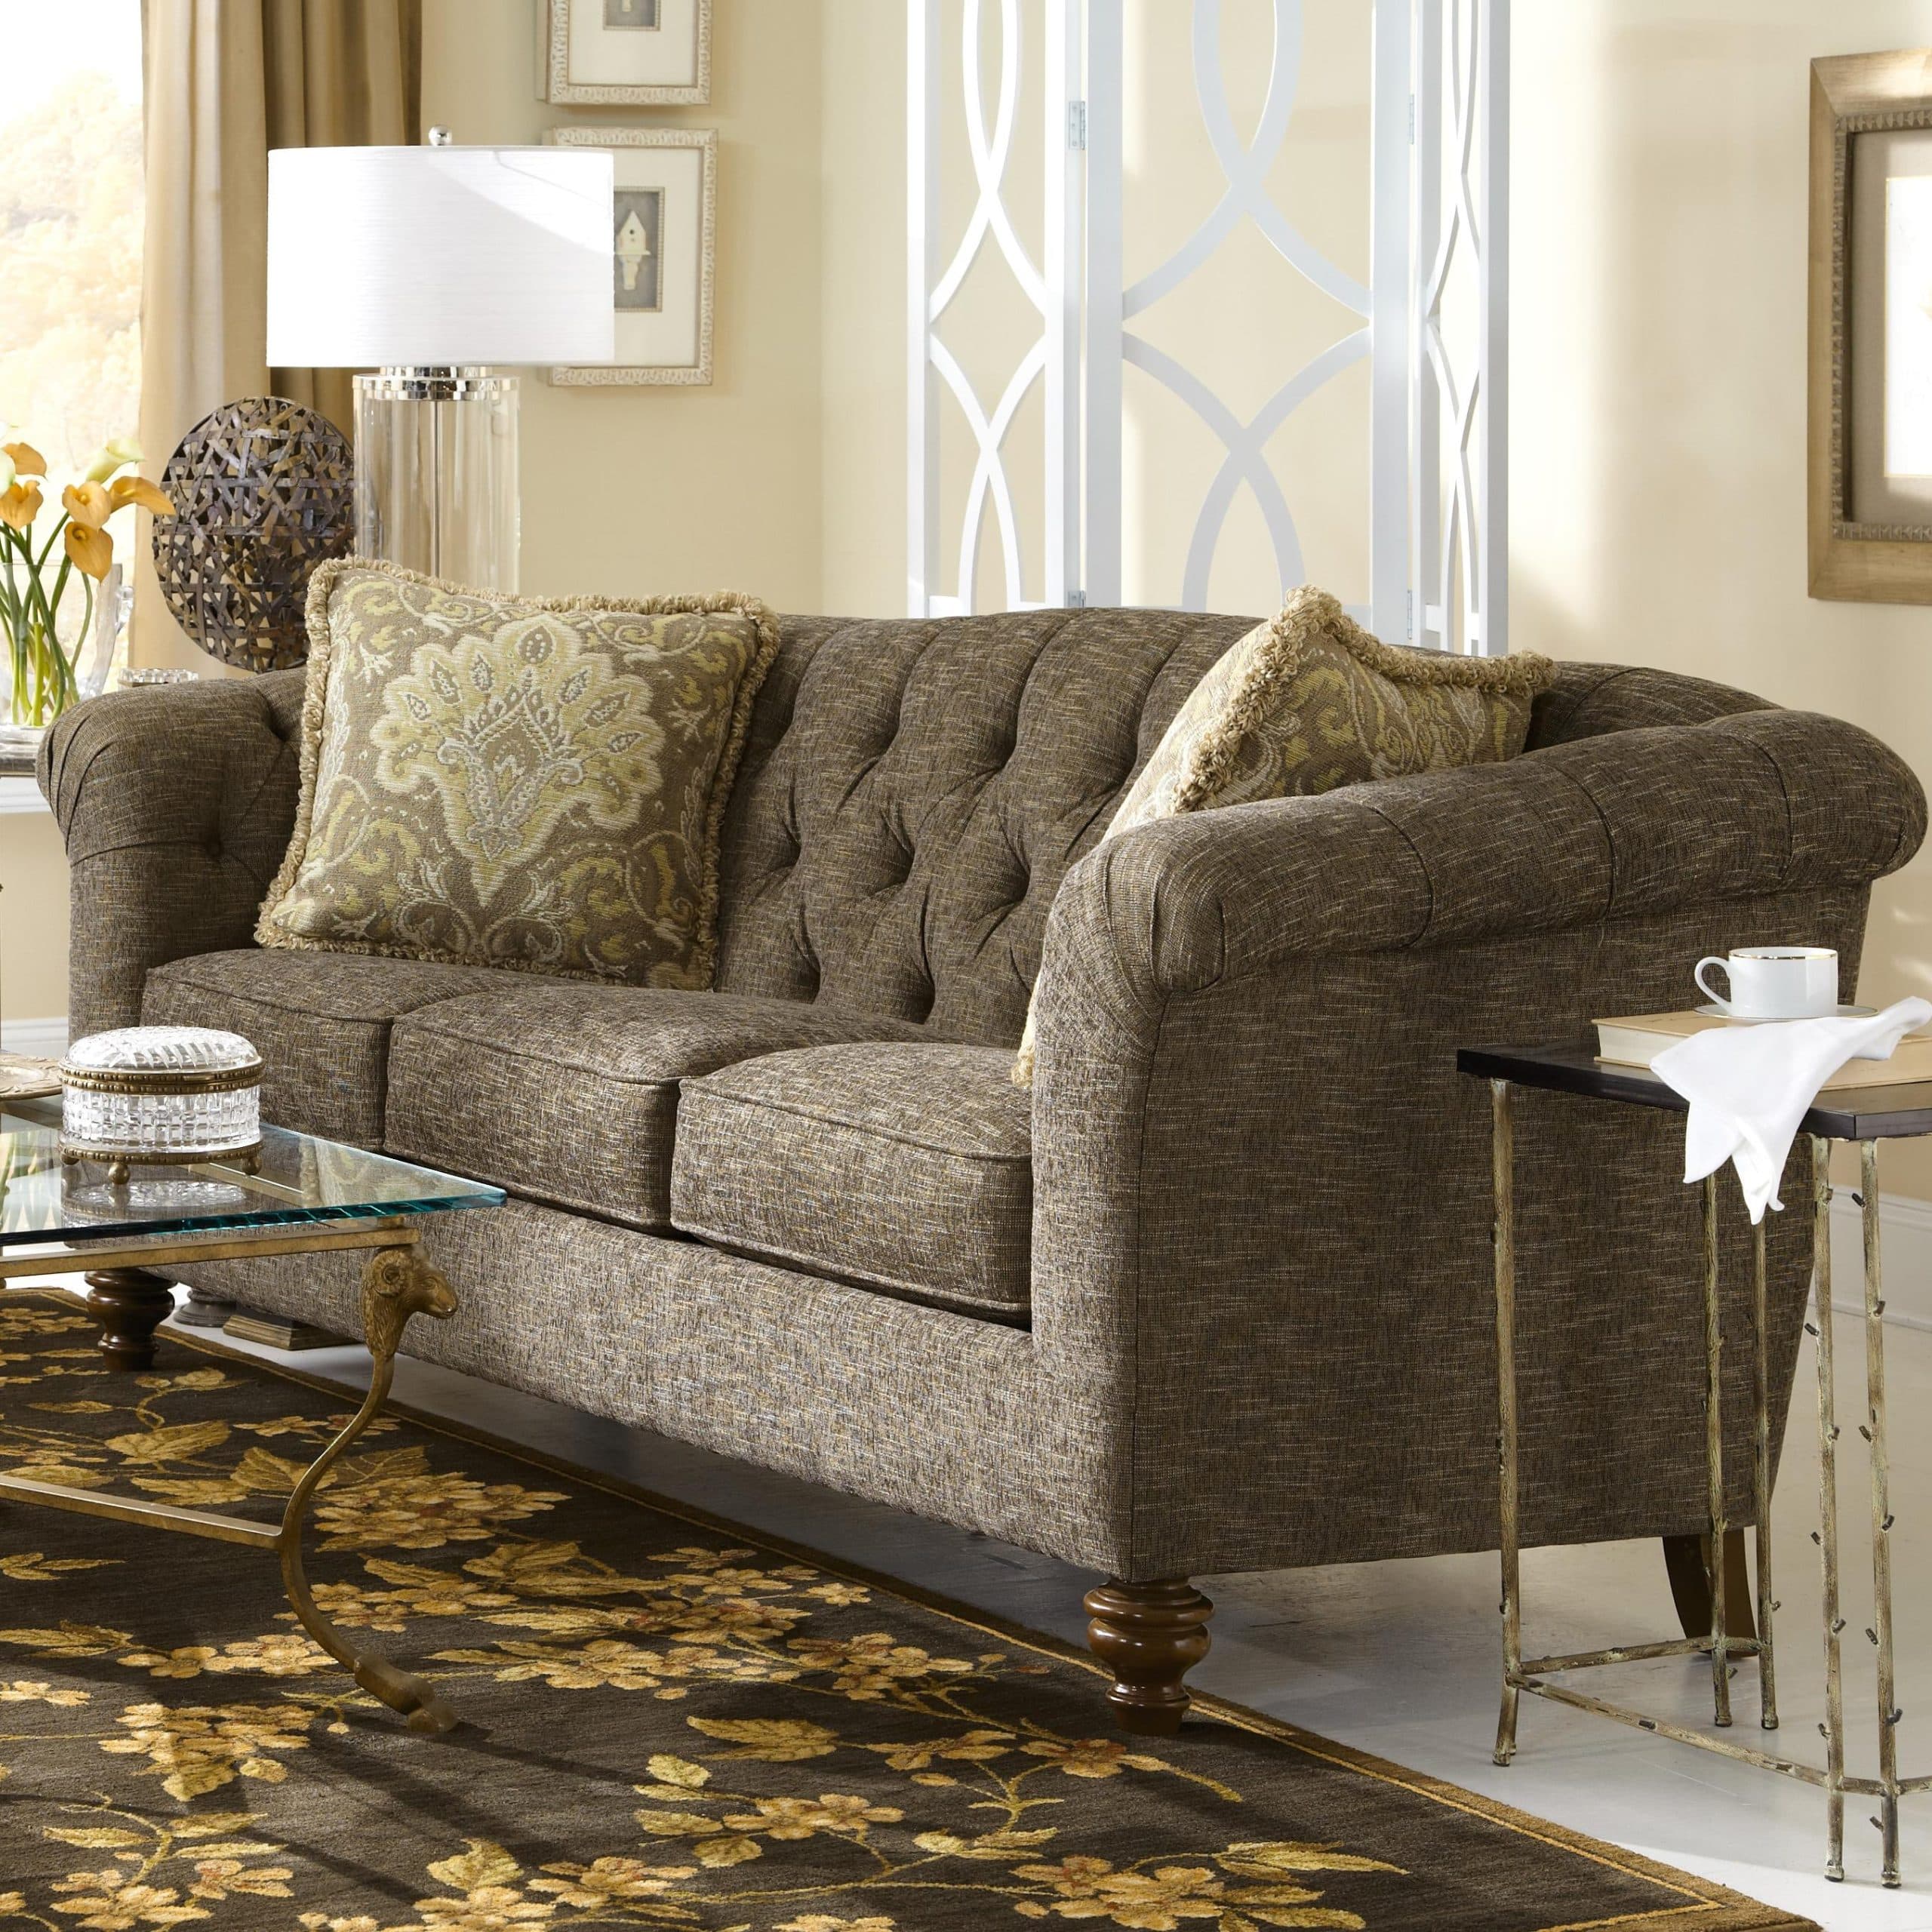 Tufted Couches.